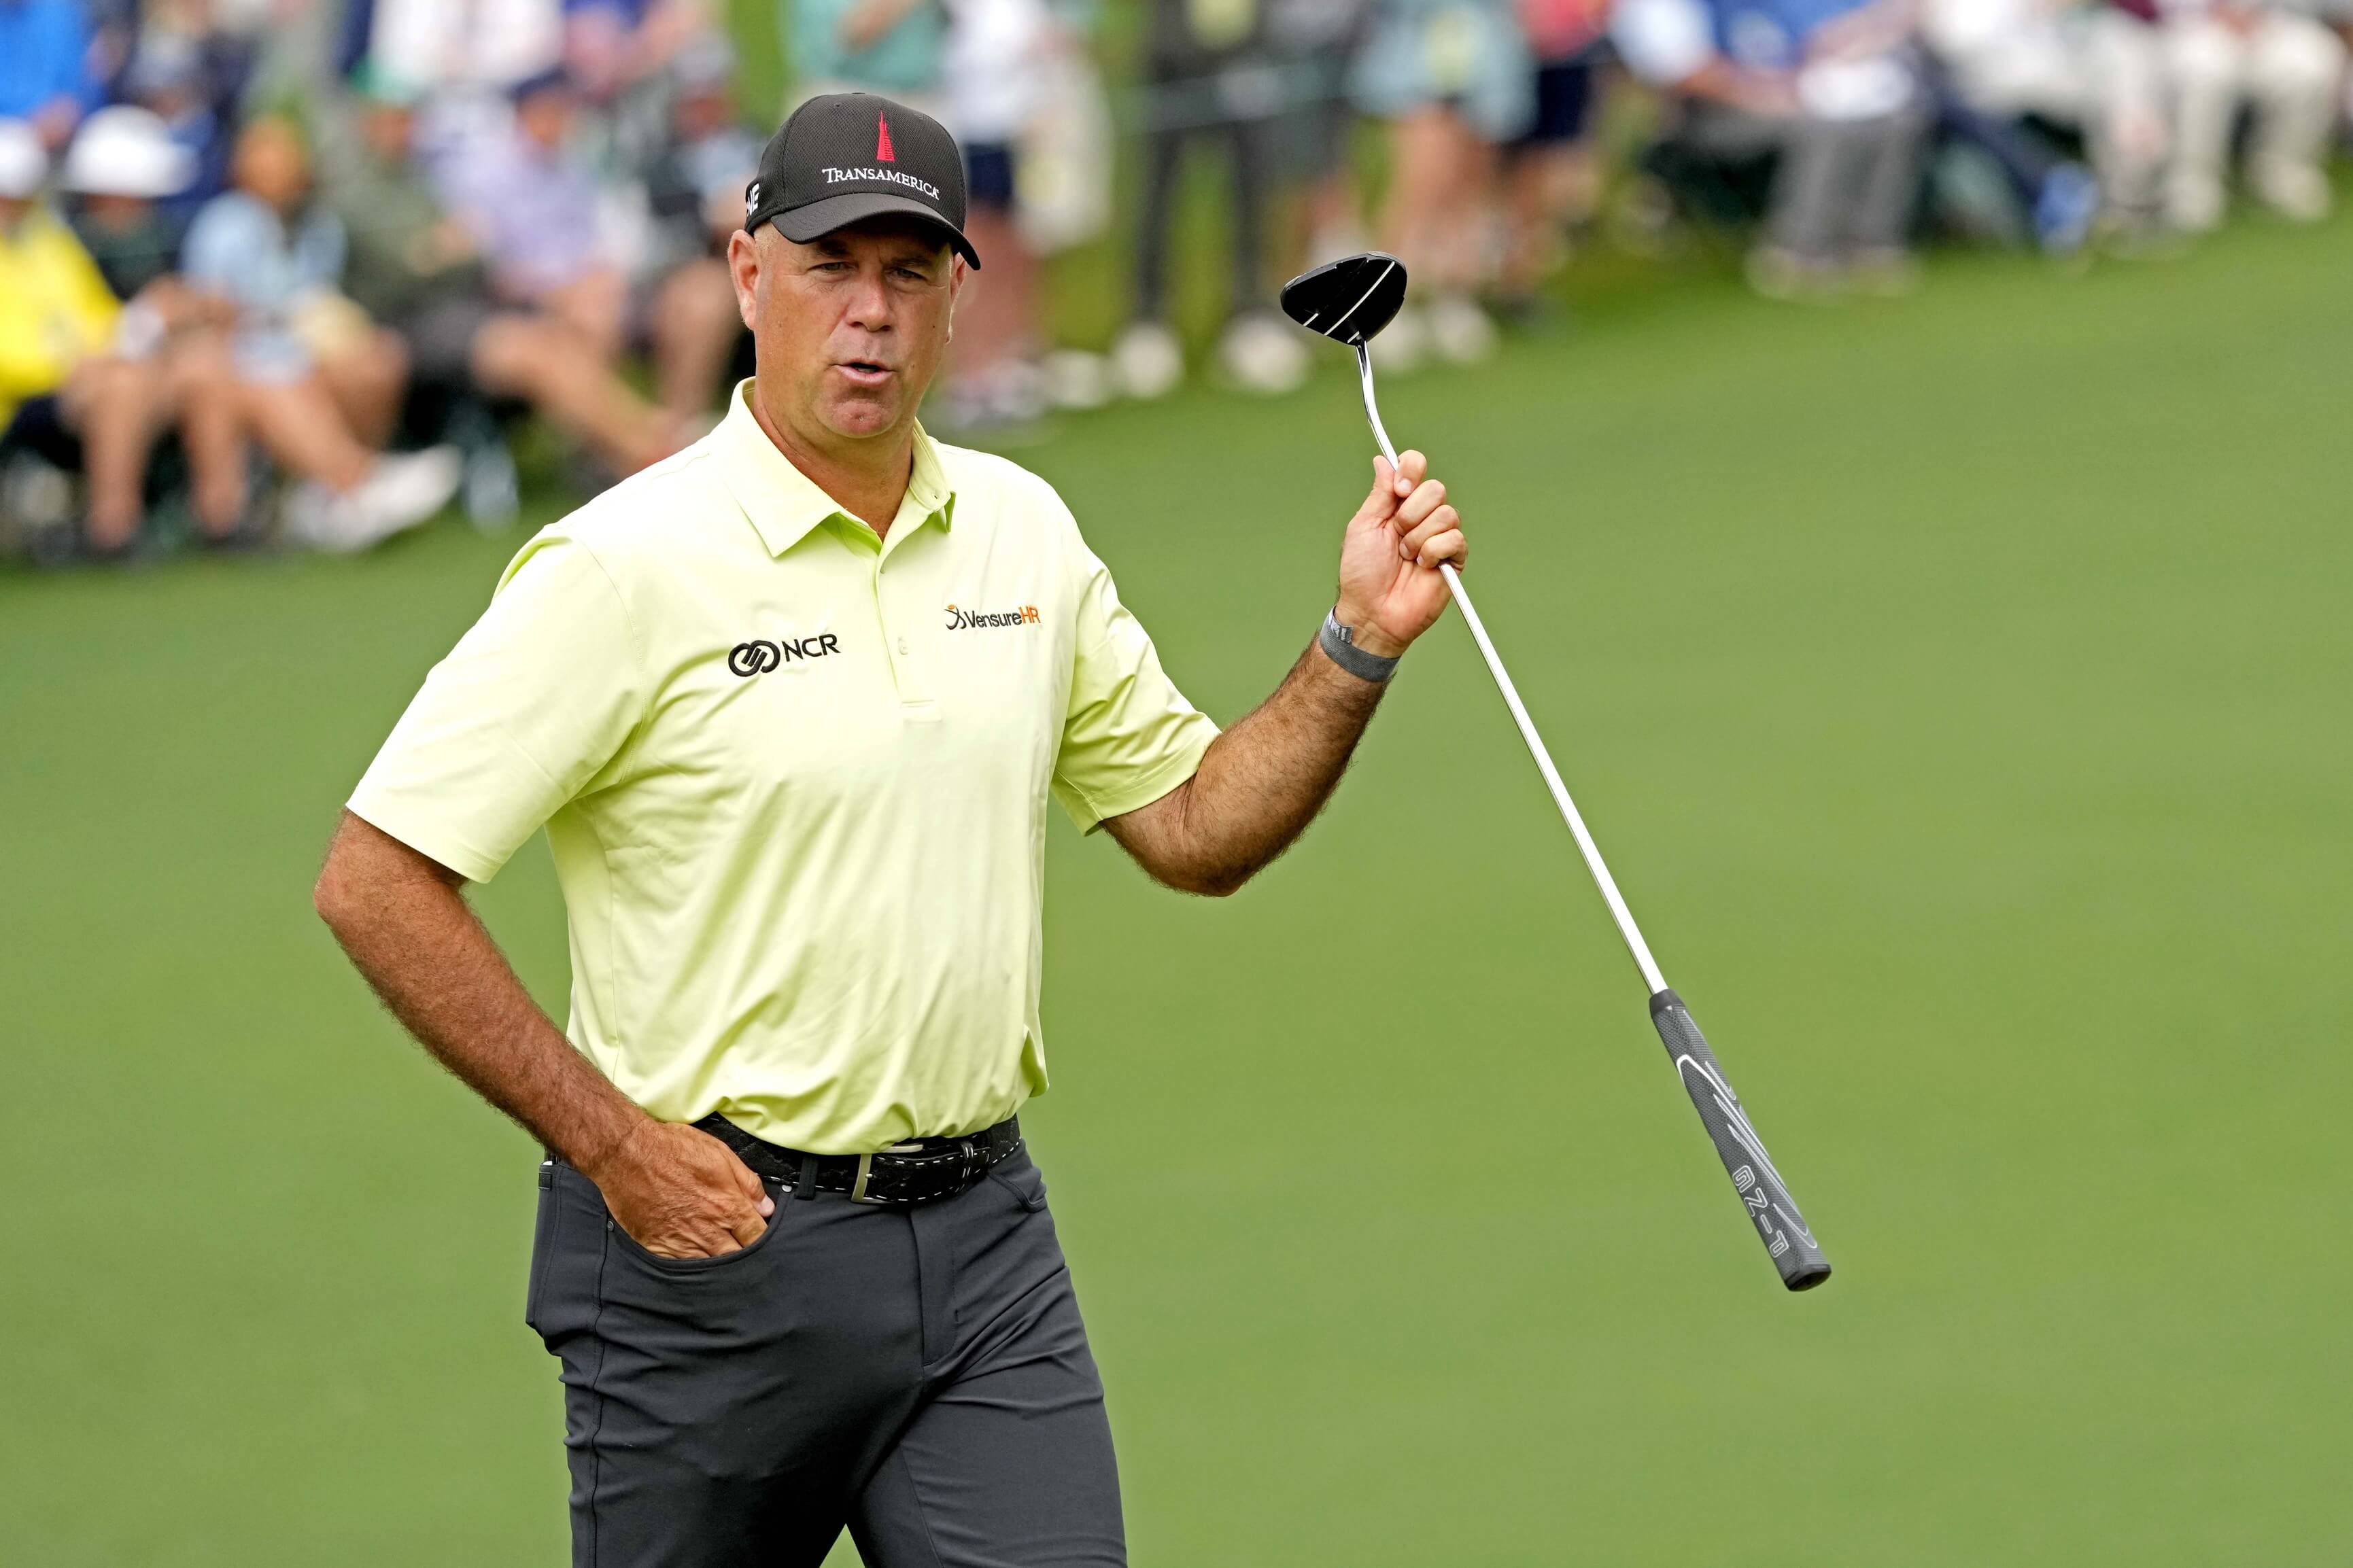 Stewart Cink reacts to his putt on the second hole during the first round of The Masters golf tournament.